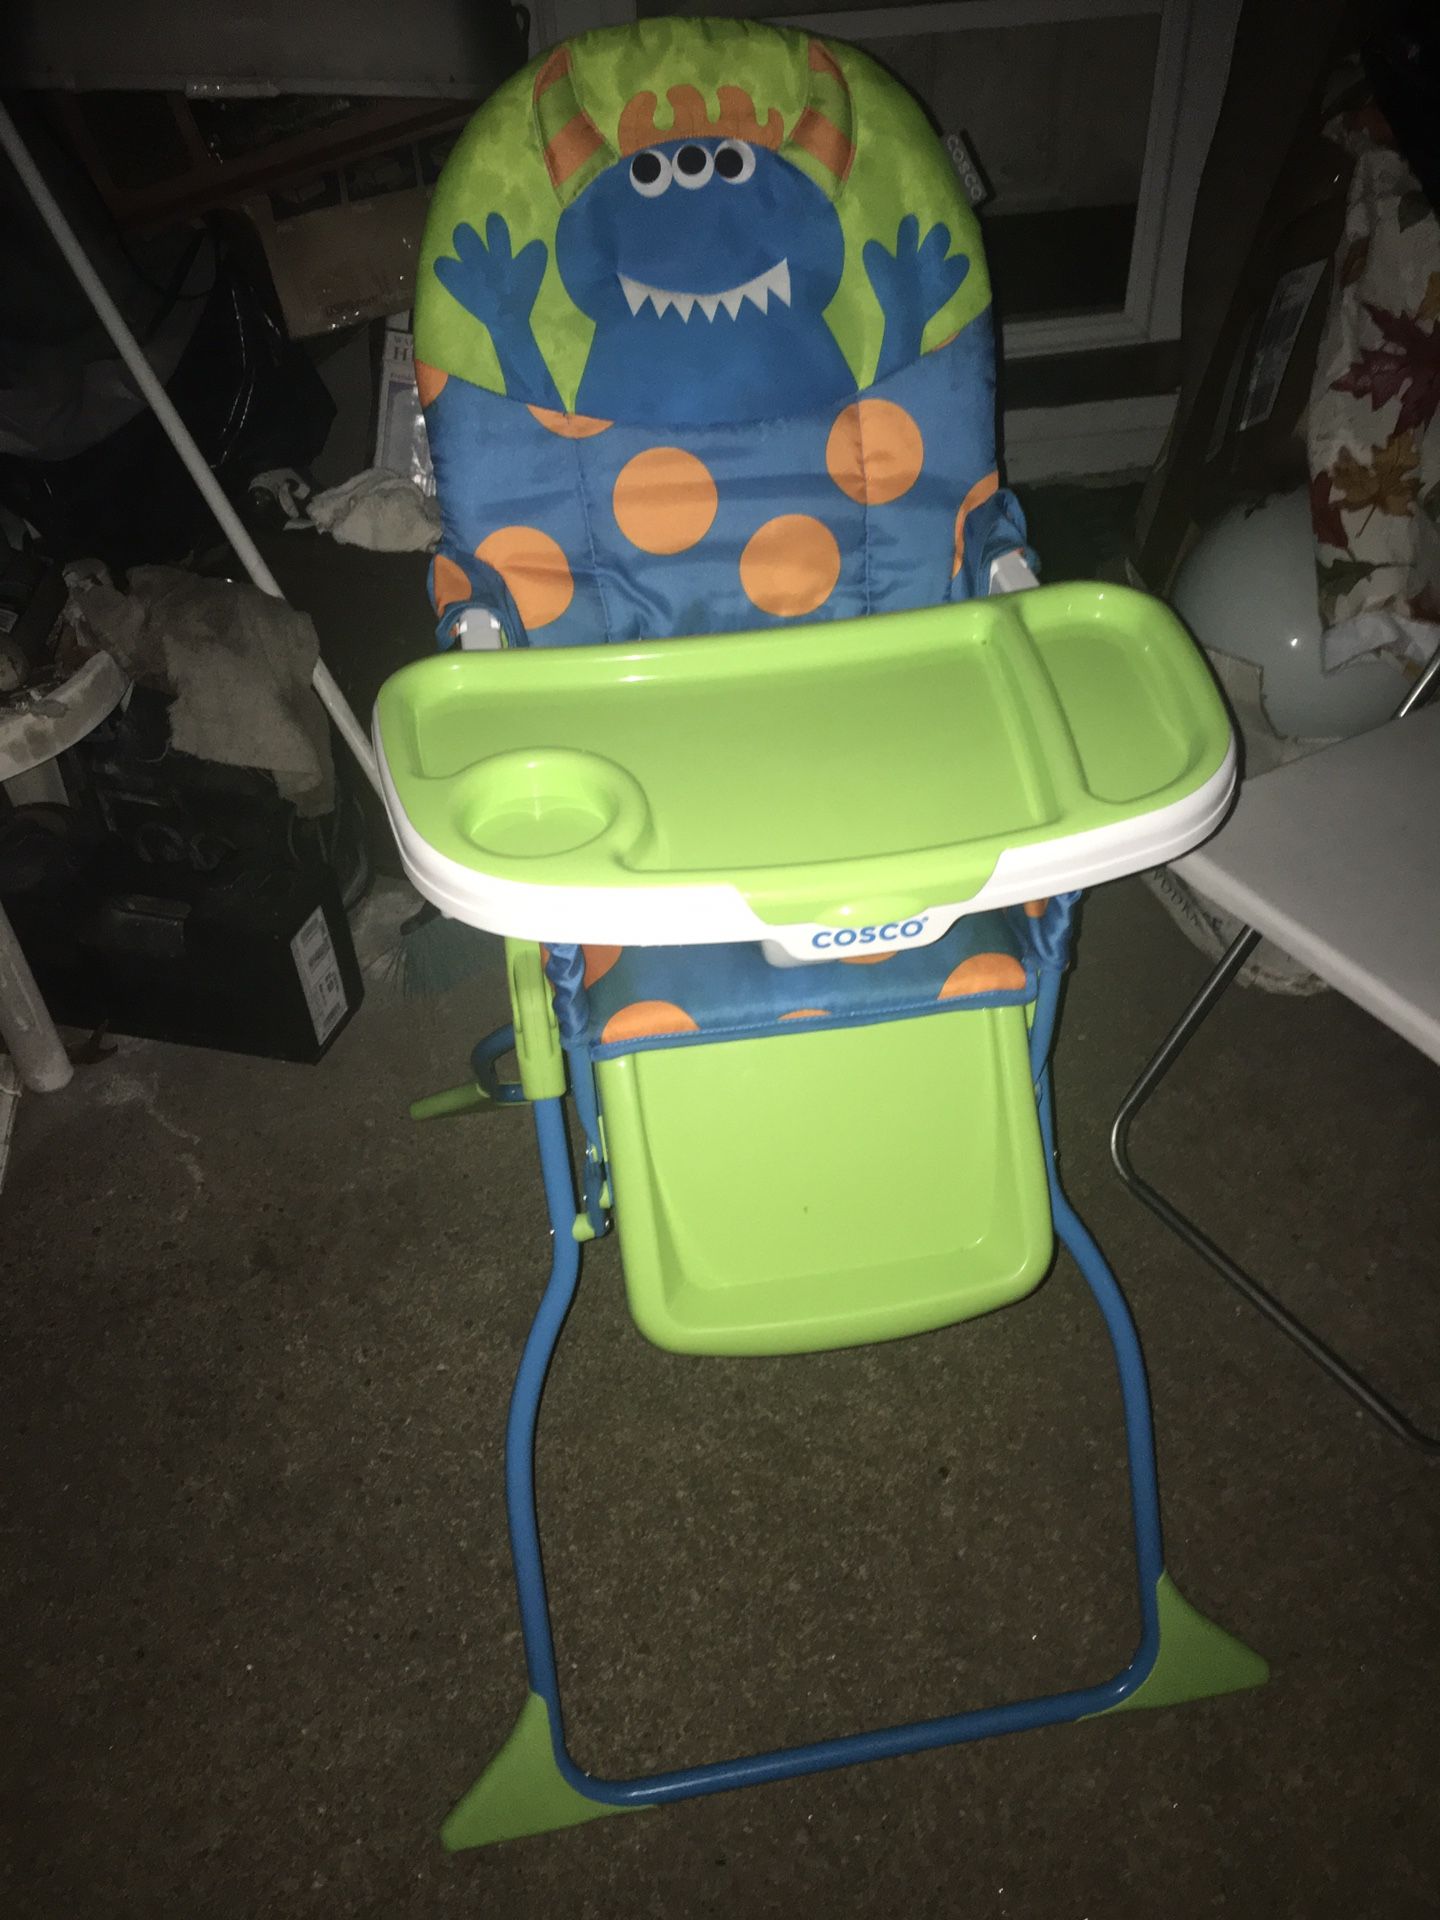 Lnew Fold up space saver high chair very nice only $30 firm